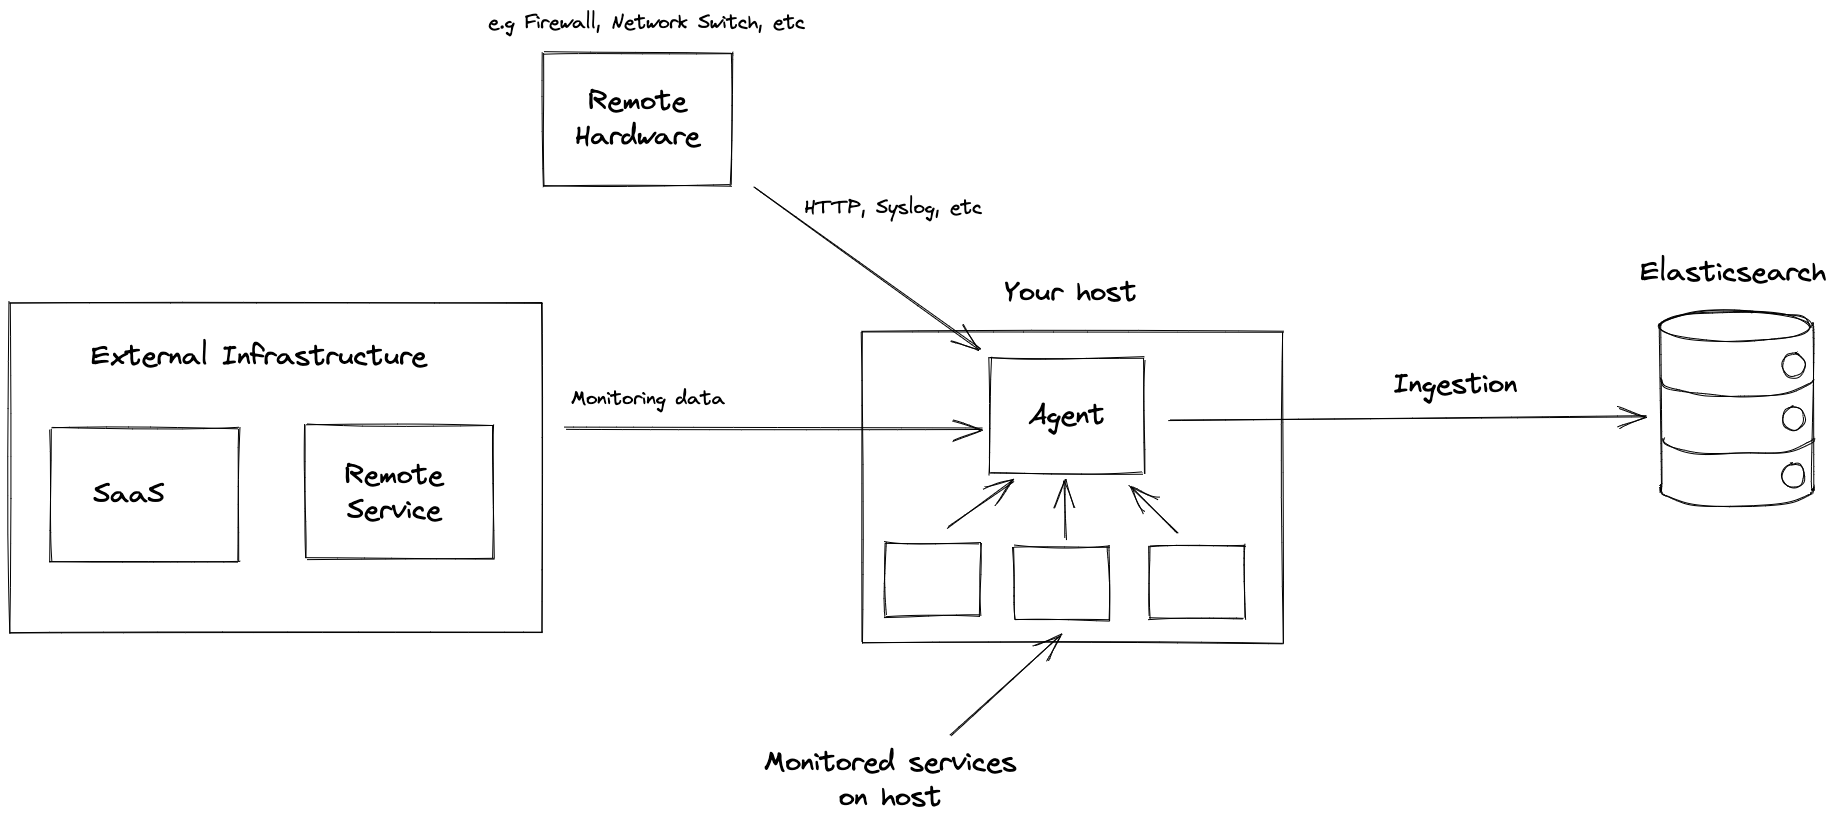 Image showing Elastic Agent collecting data from local host and remote services